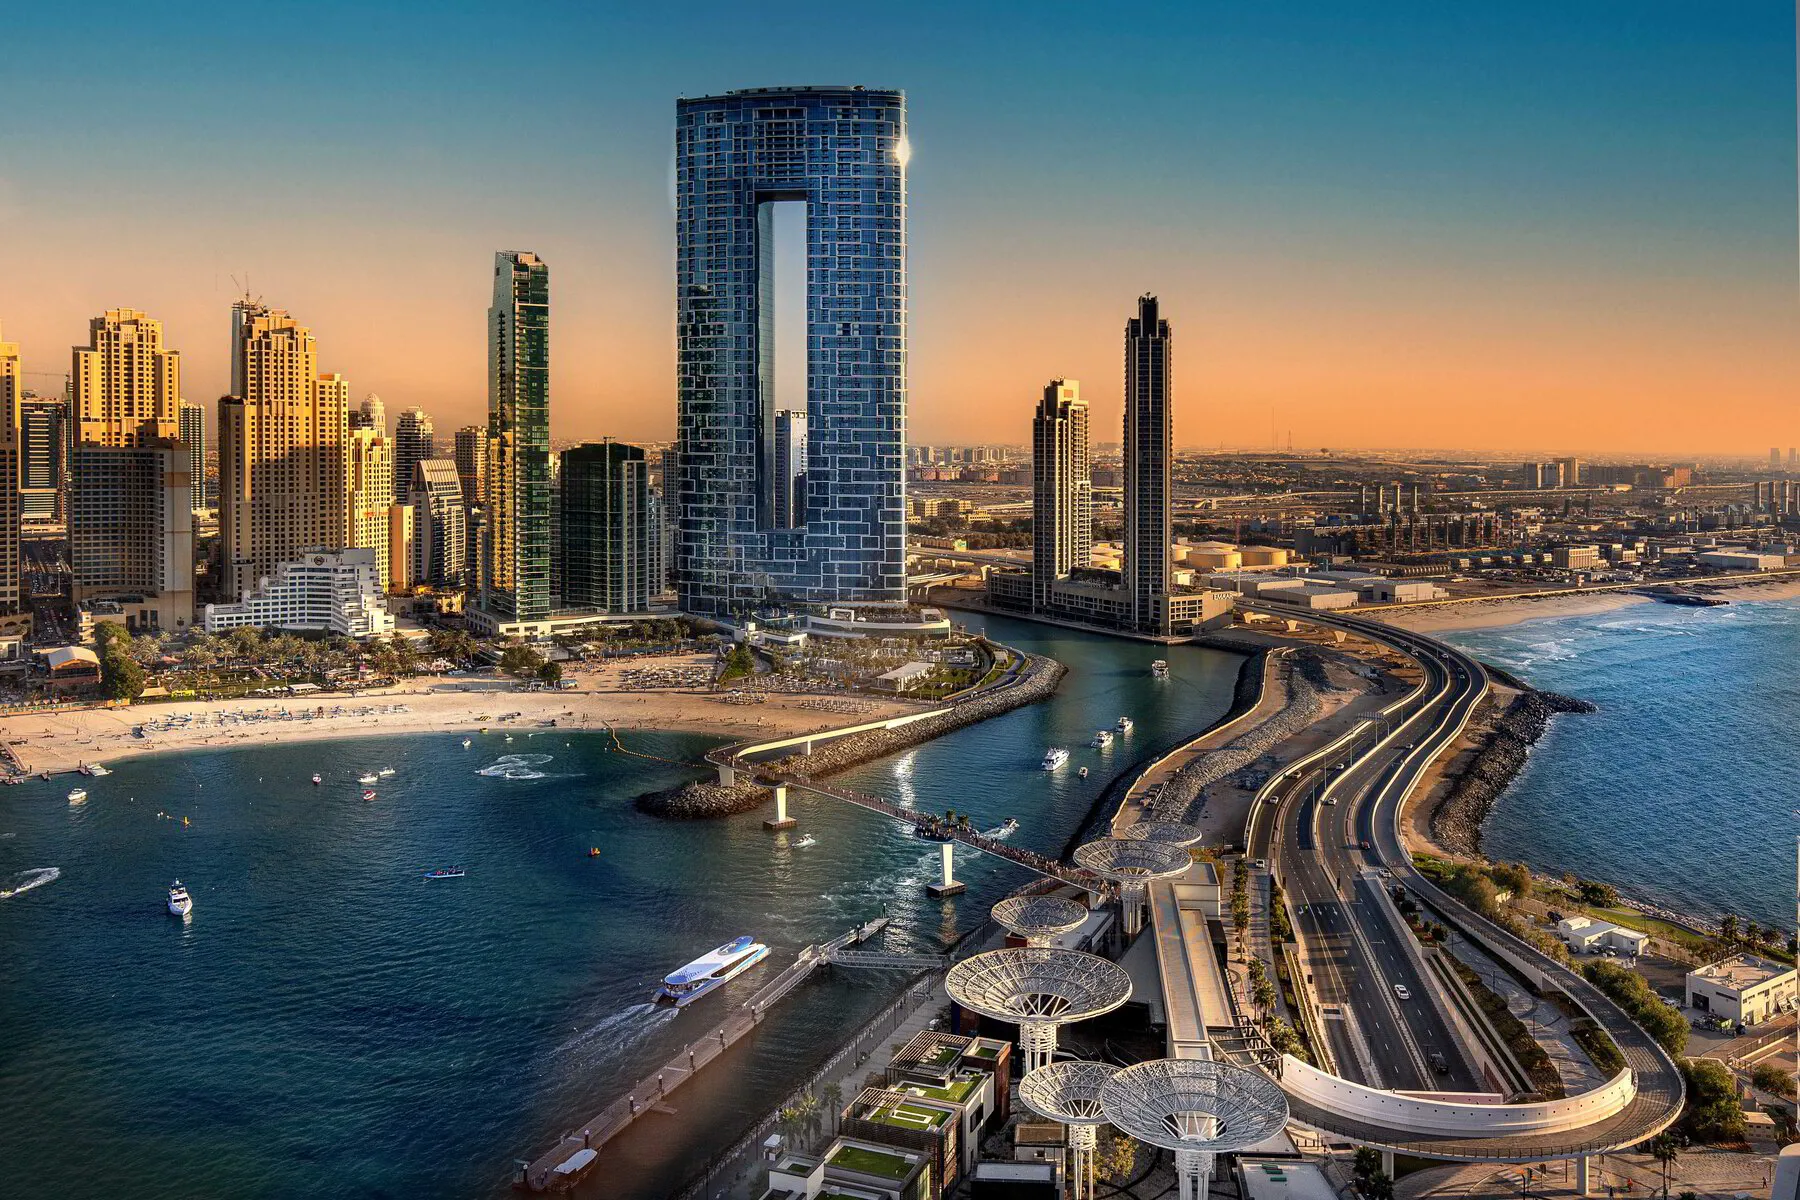 Company incoporation in Dubai and Licensing with Residence - all-in-one package